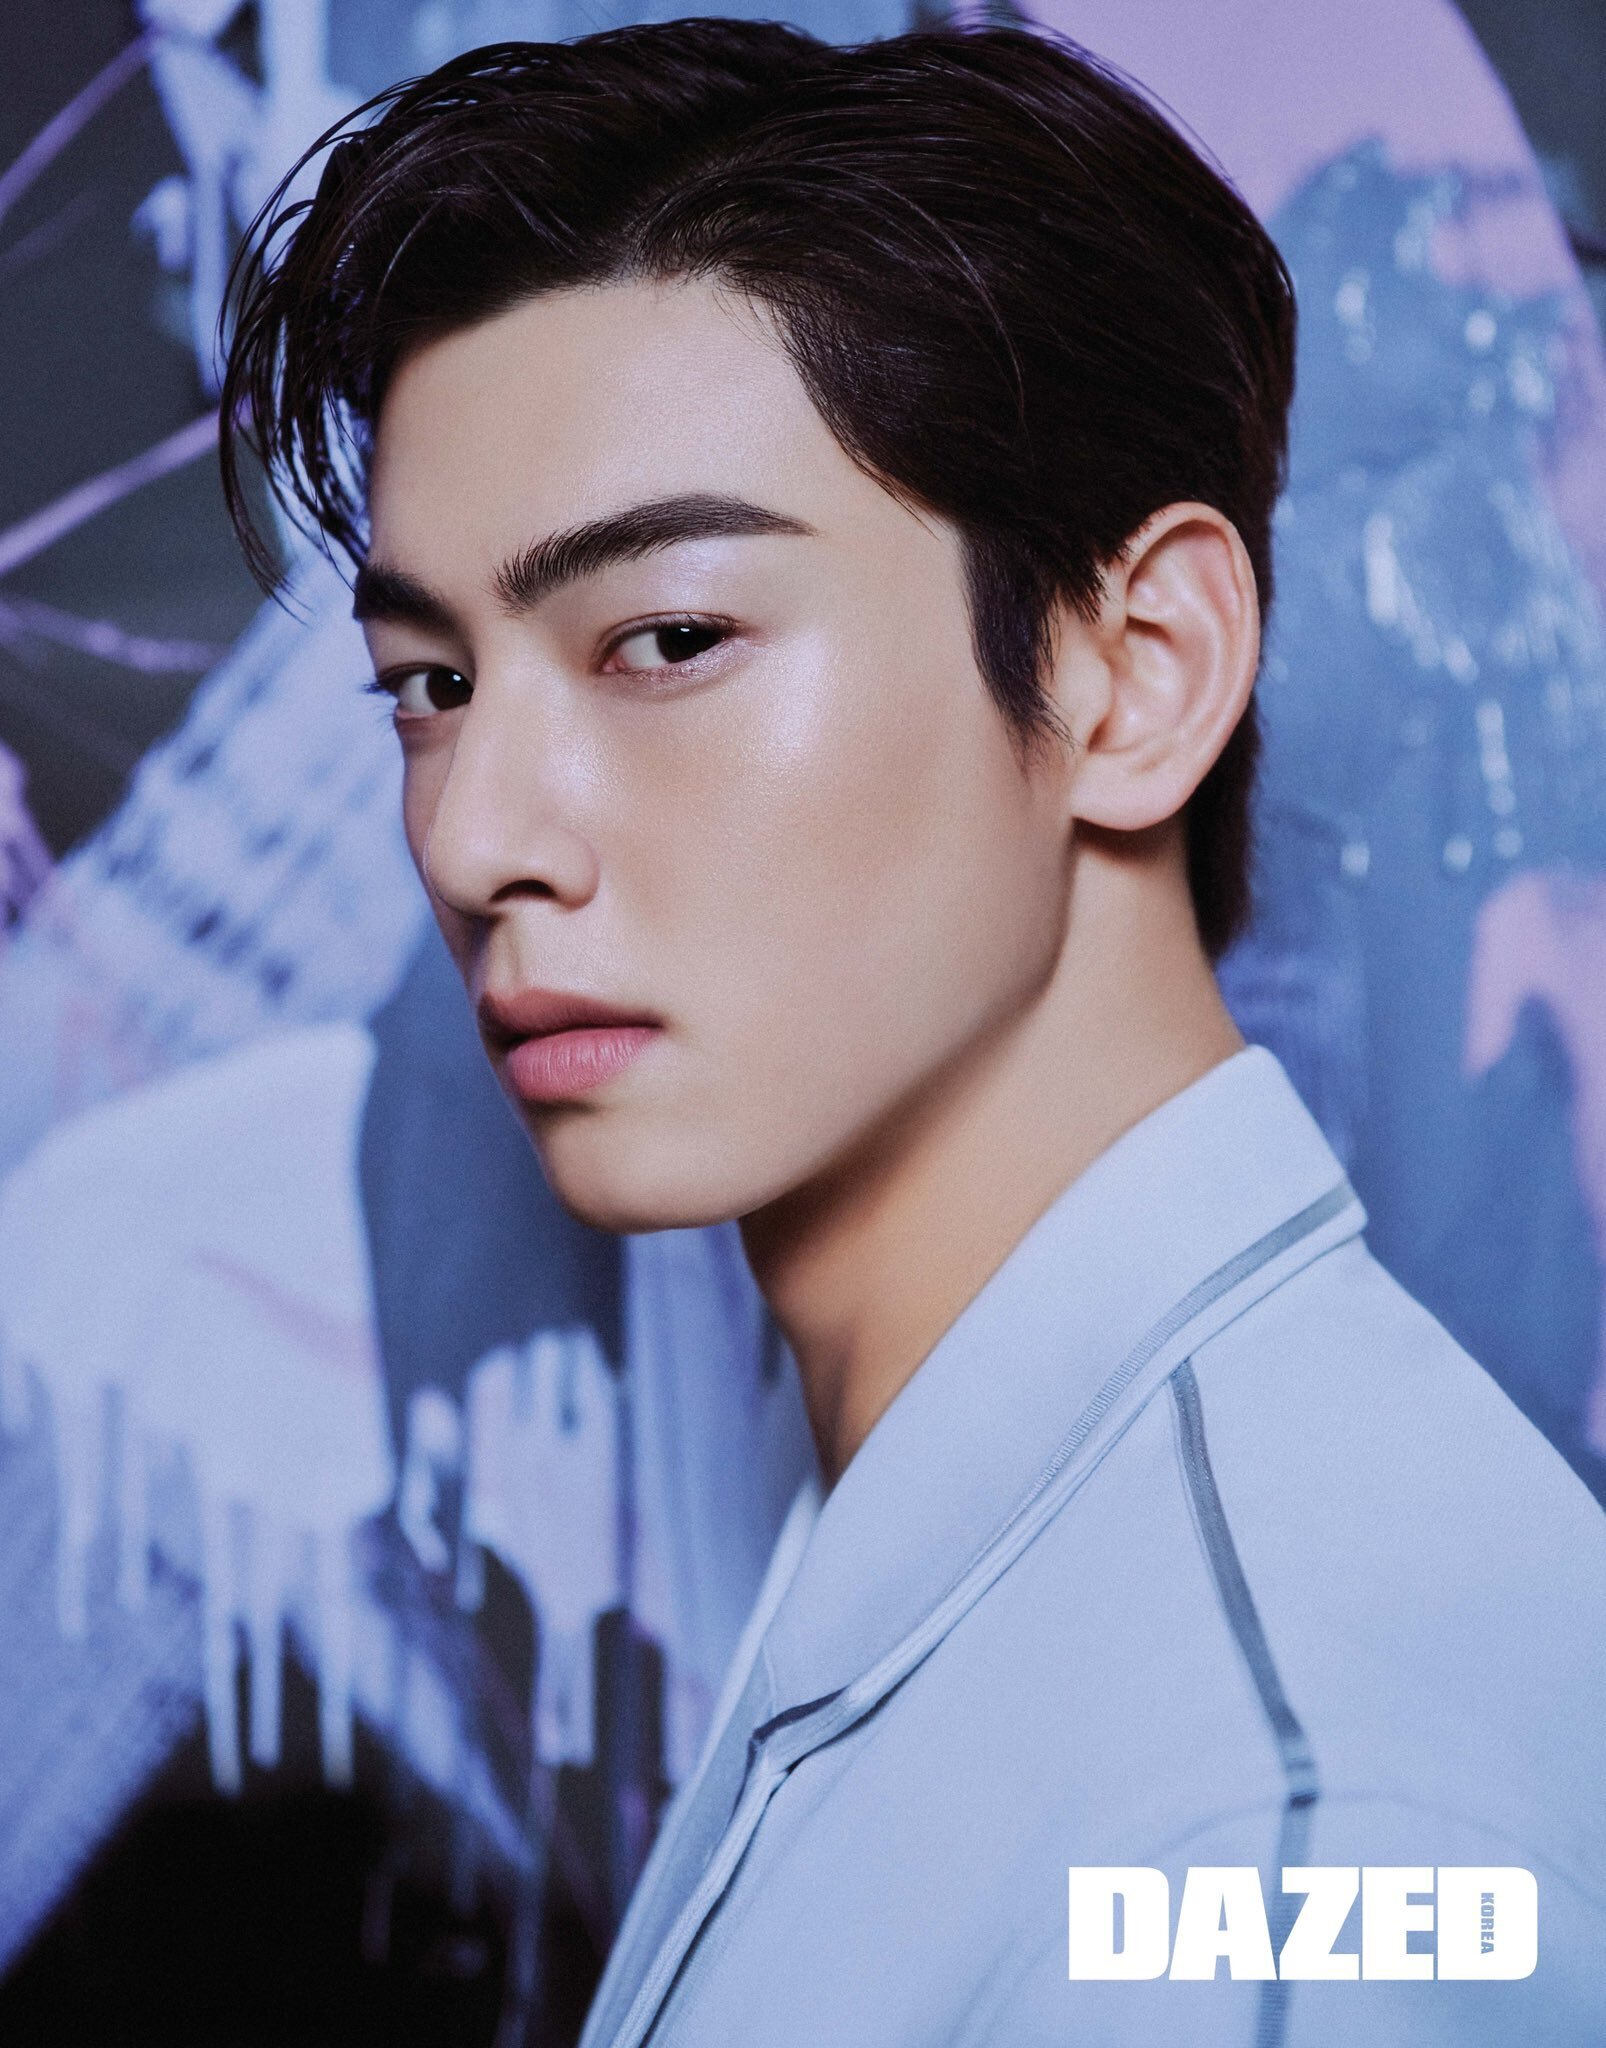 ASTRO's Cha Eunwoo Is Collecting Celebrities Like Pokémon Cards At “Dior  Men's Fall 2023 Collection” Event - Koreaboo